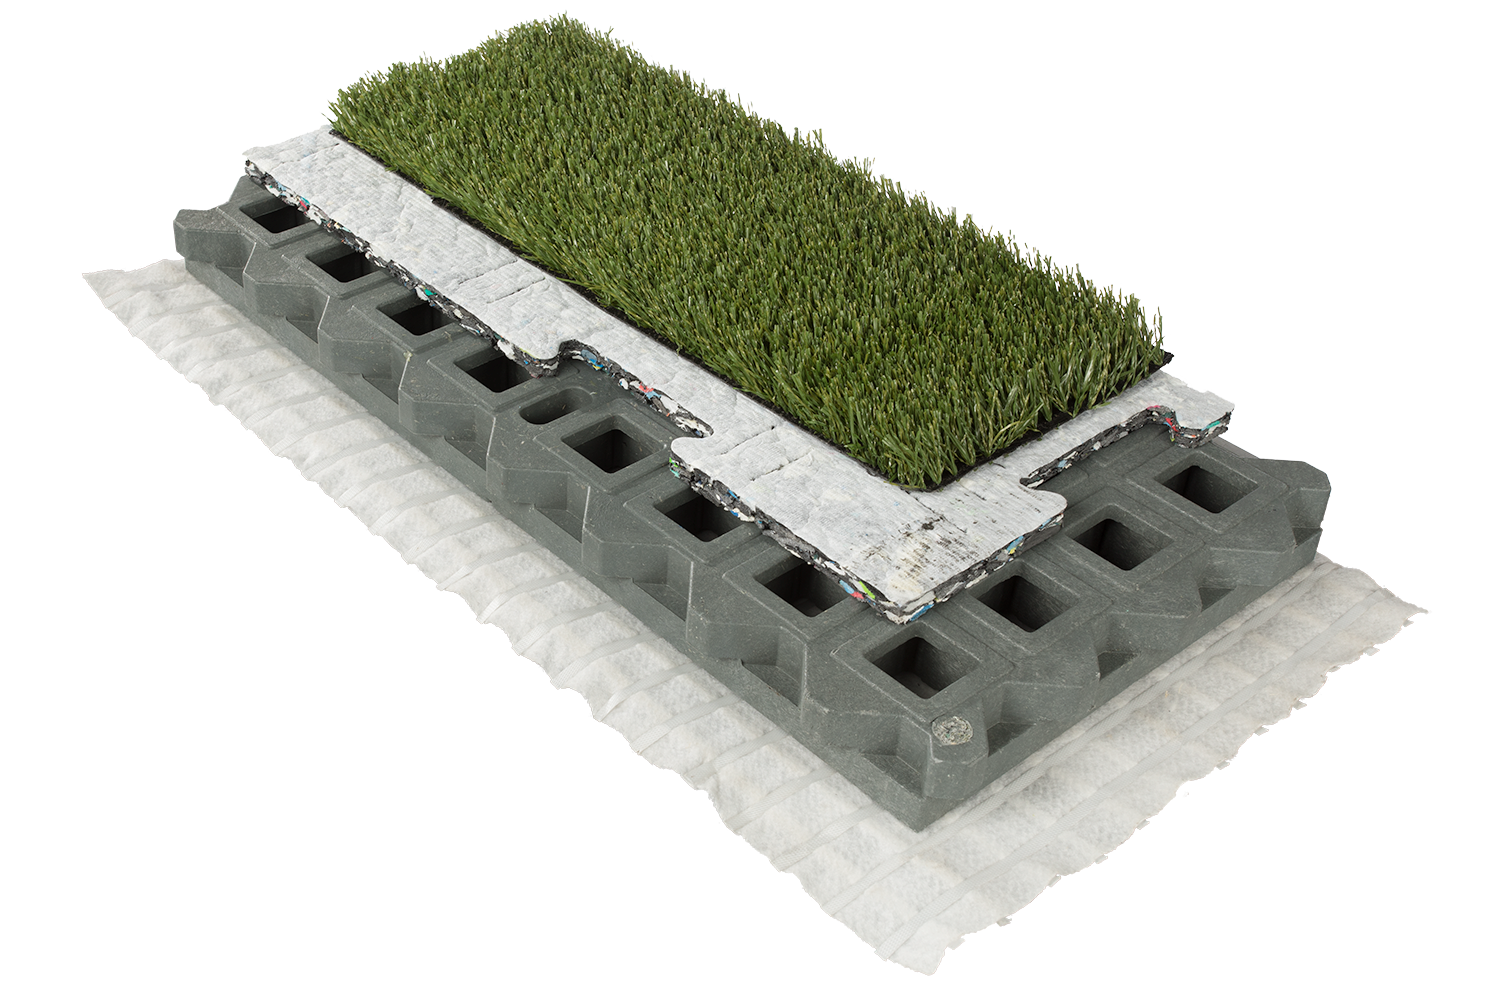 Construction of a TTE® artificial turf pitch for football and other sports.